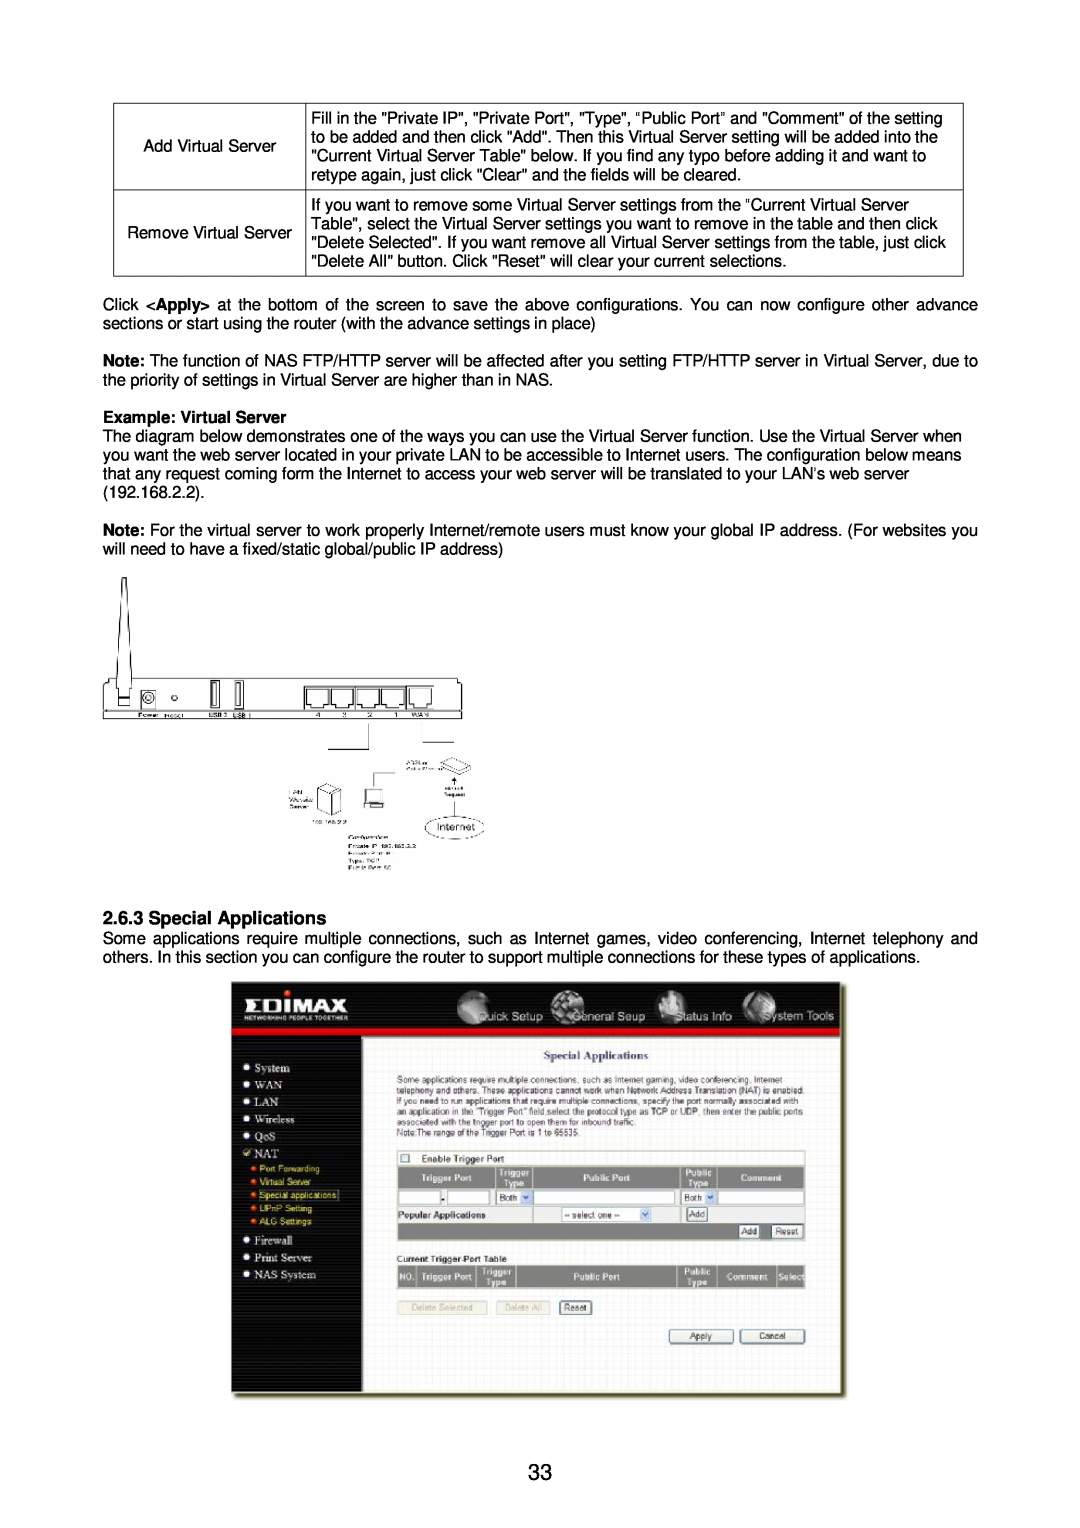 Edimax Technology Broadband Router manual Special Applications, Example Virtual Server 